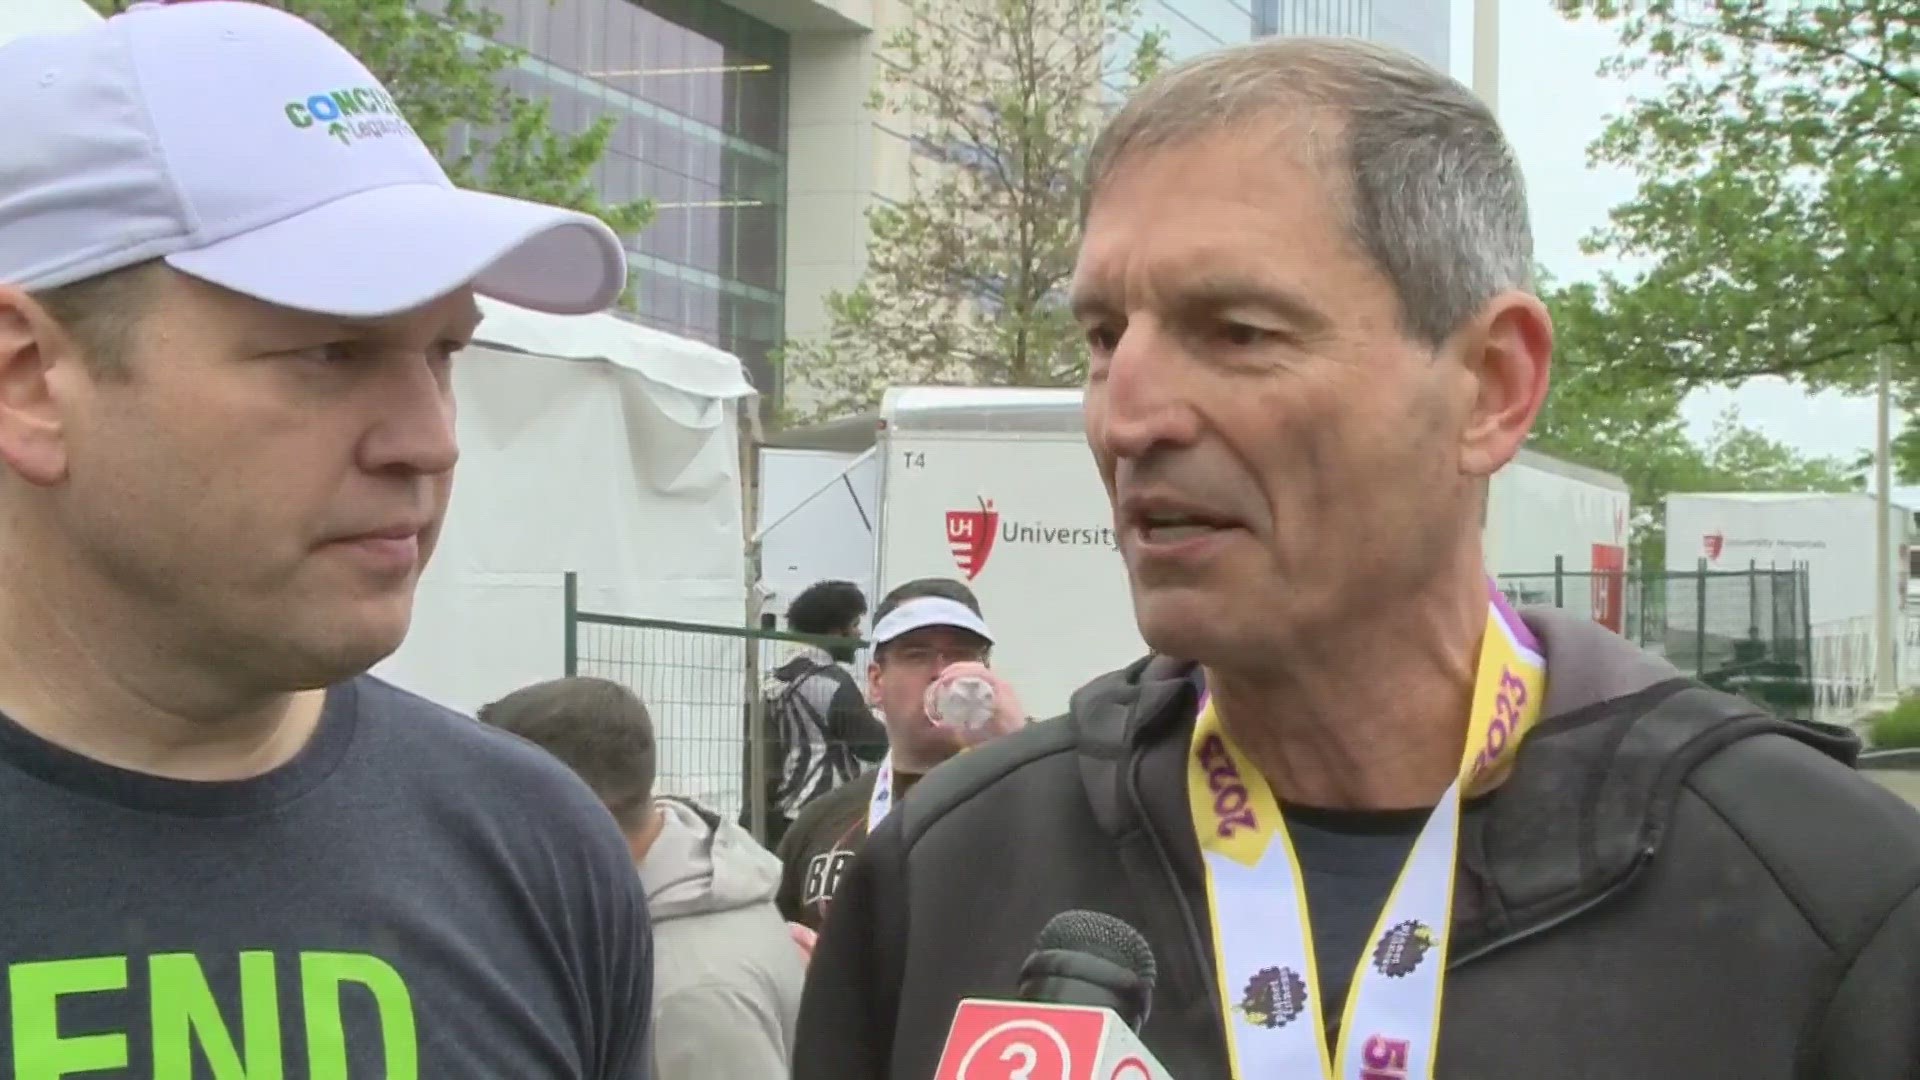 Former Cleveland Browns QB Bernie Kosar remembered Jim Brown after completing the 5K at the Cleveland Marathon.